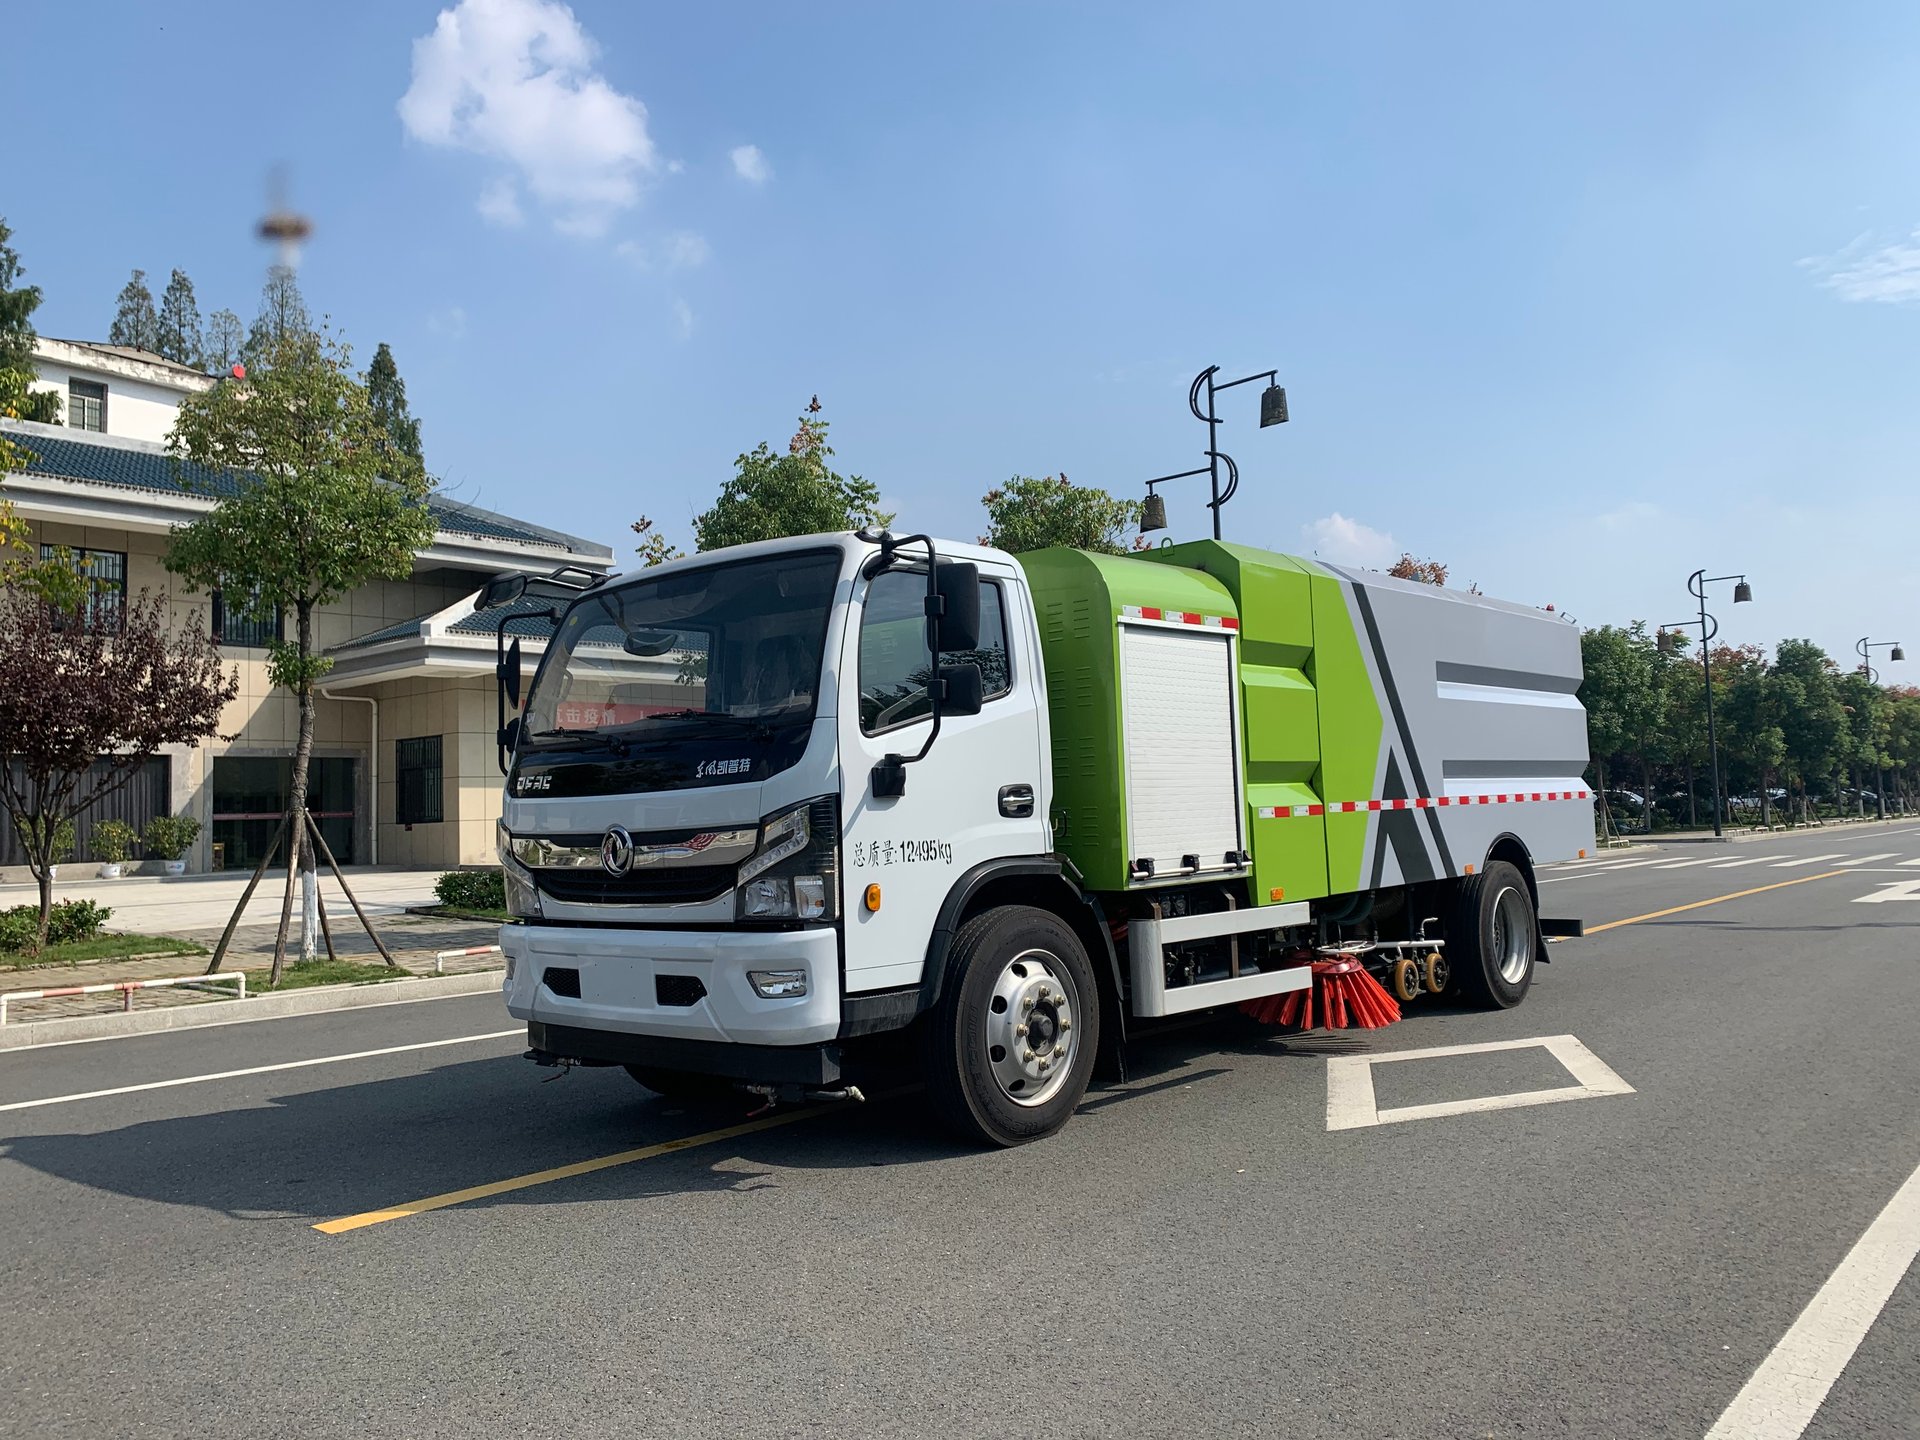 CL5123 Electronic Street Sweeper & Sweeper Truck